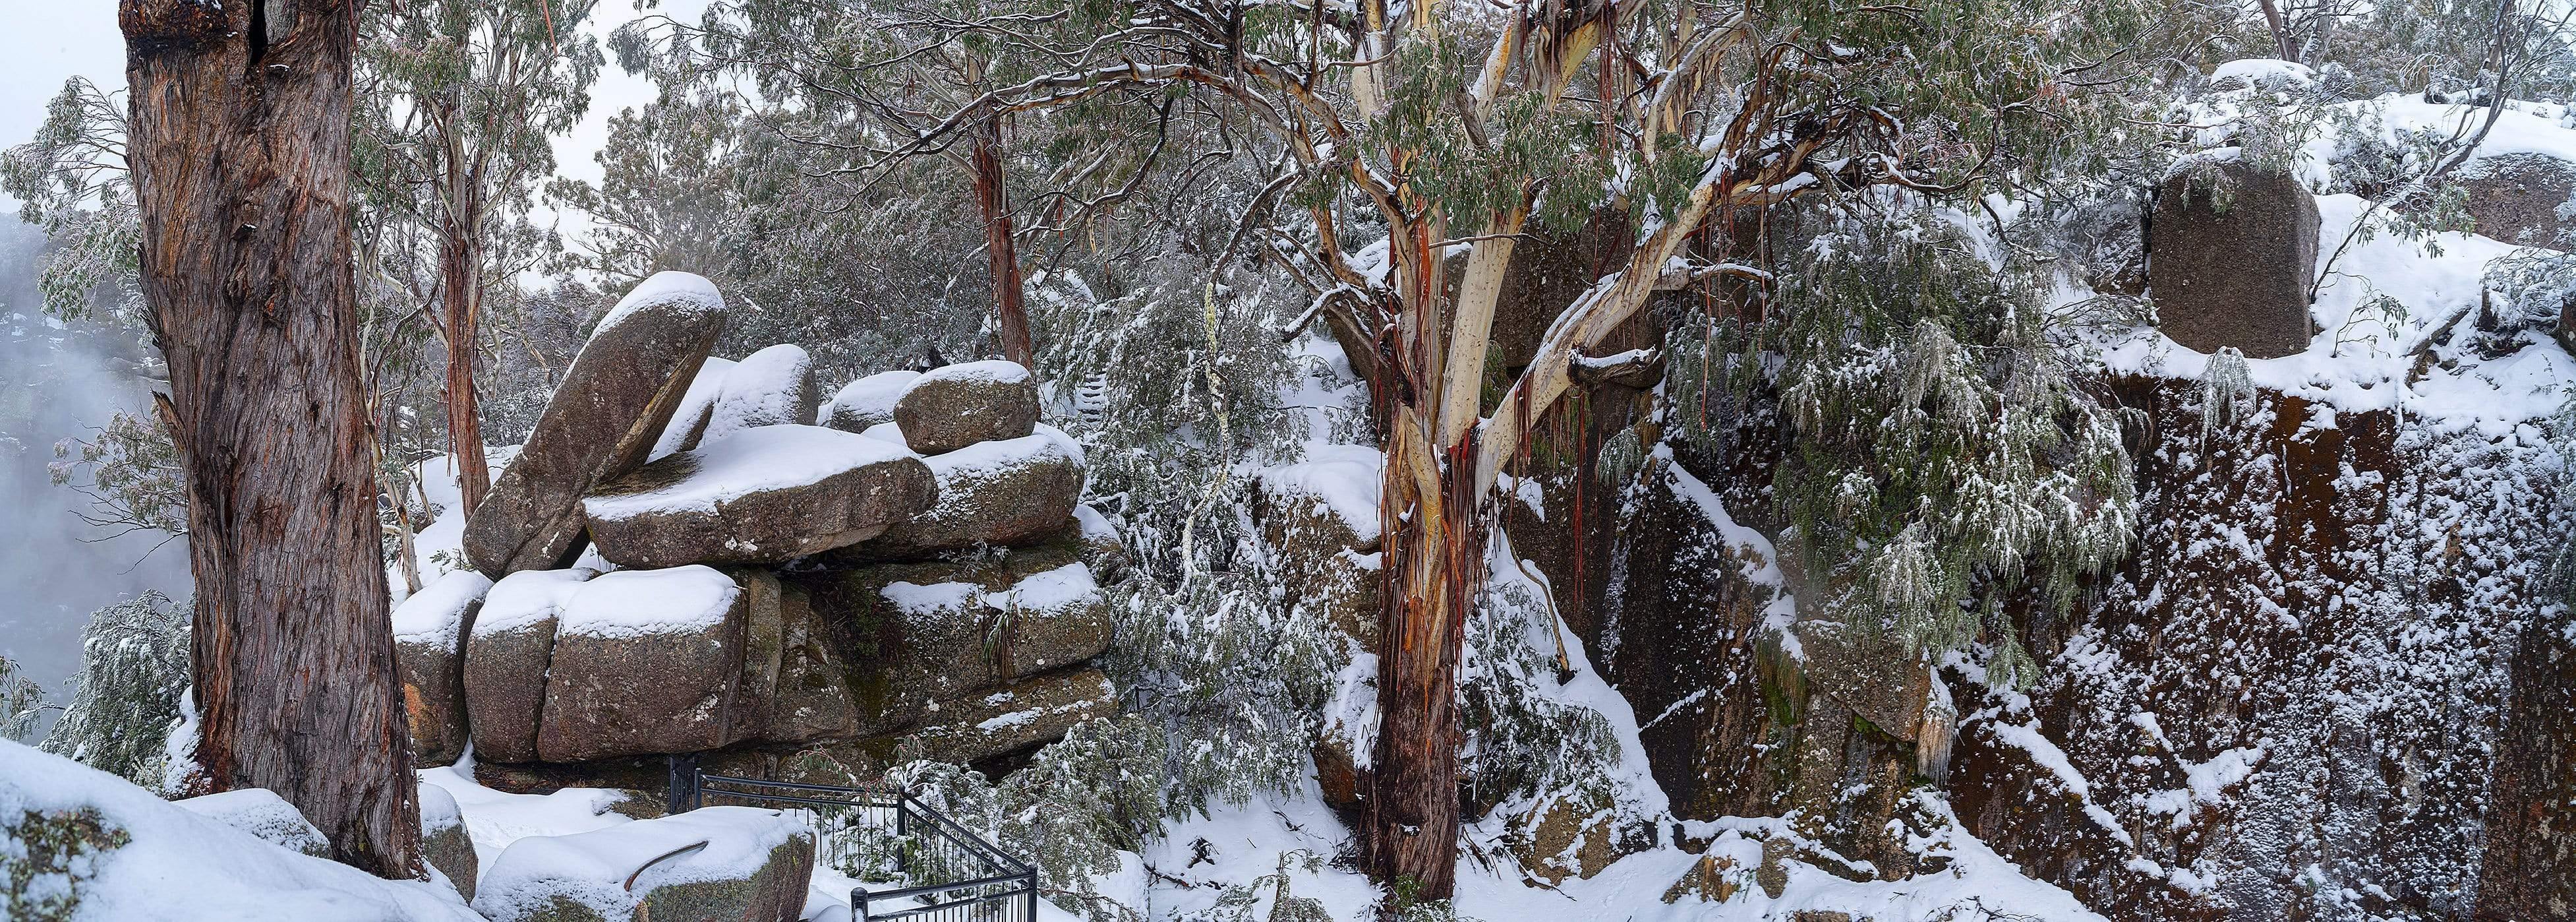 A Hill area with some trees and stones covered with fresh snow, Buffalo Snow - Victorian High Country